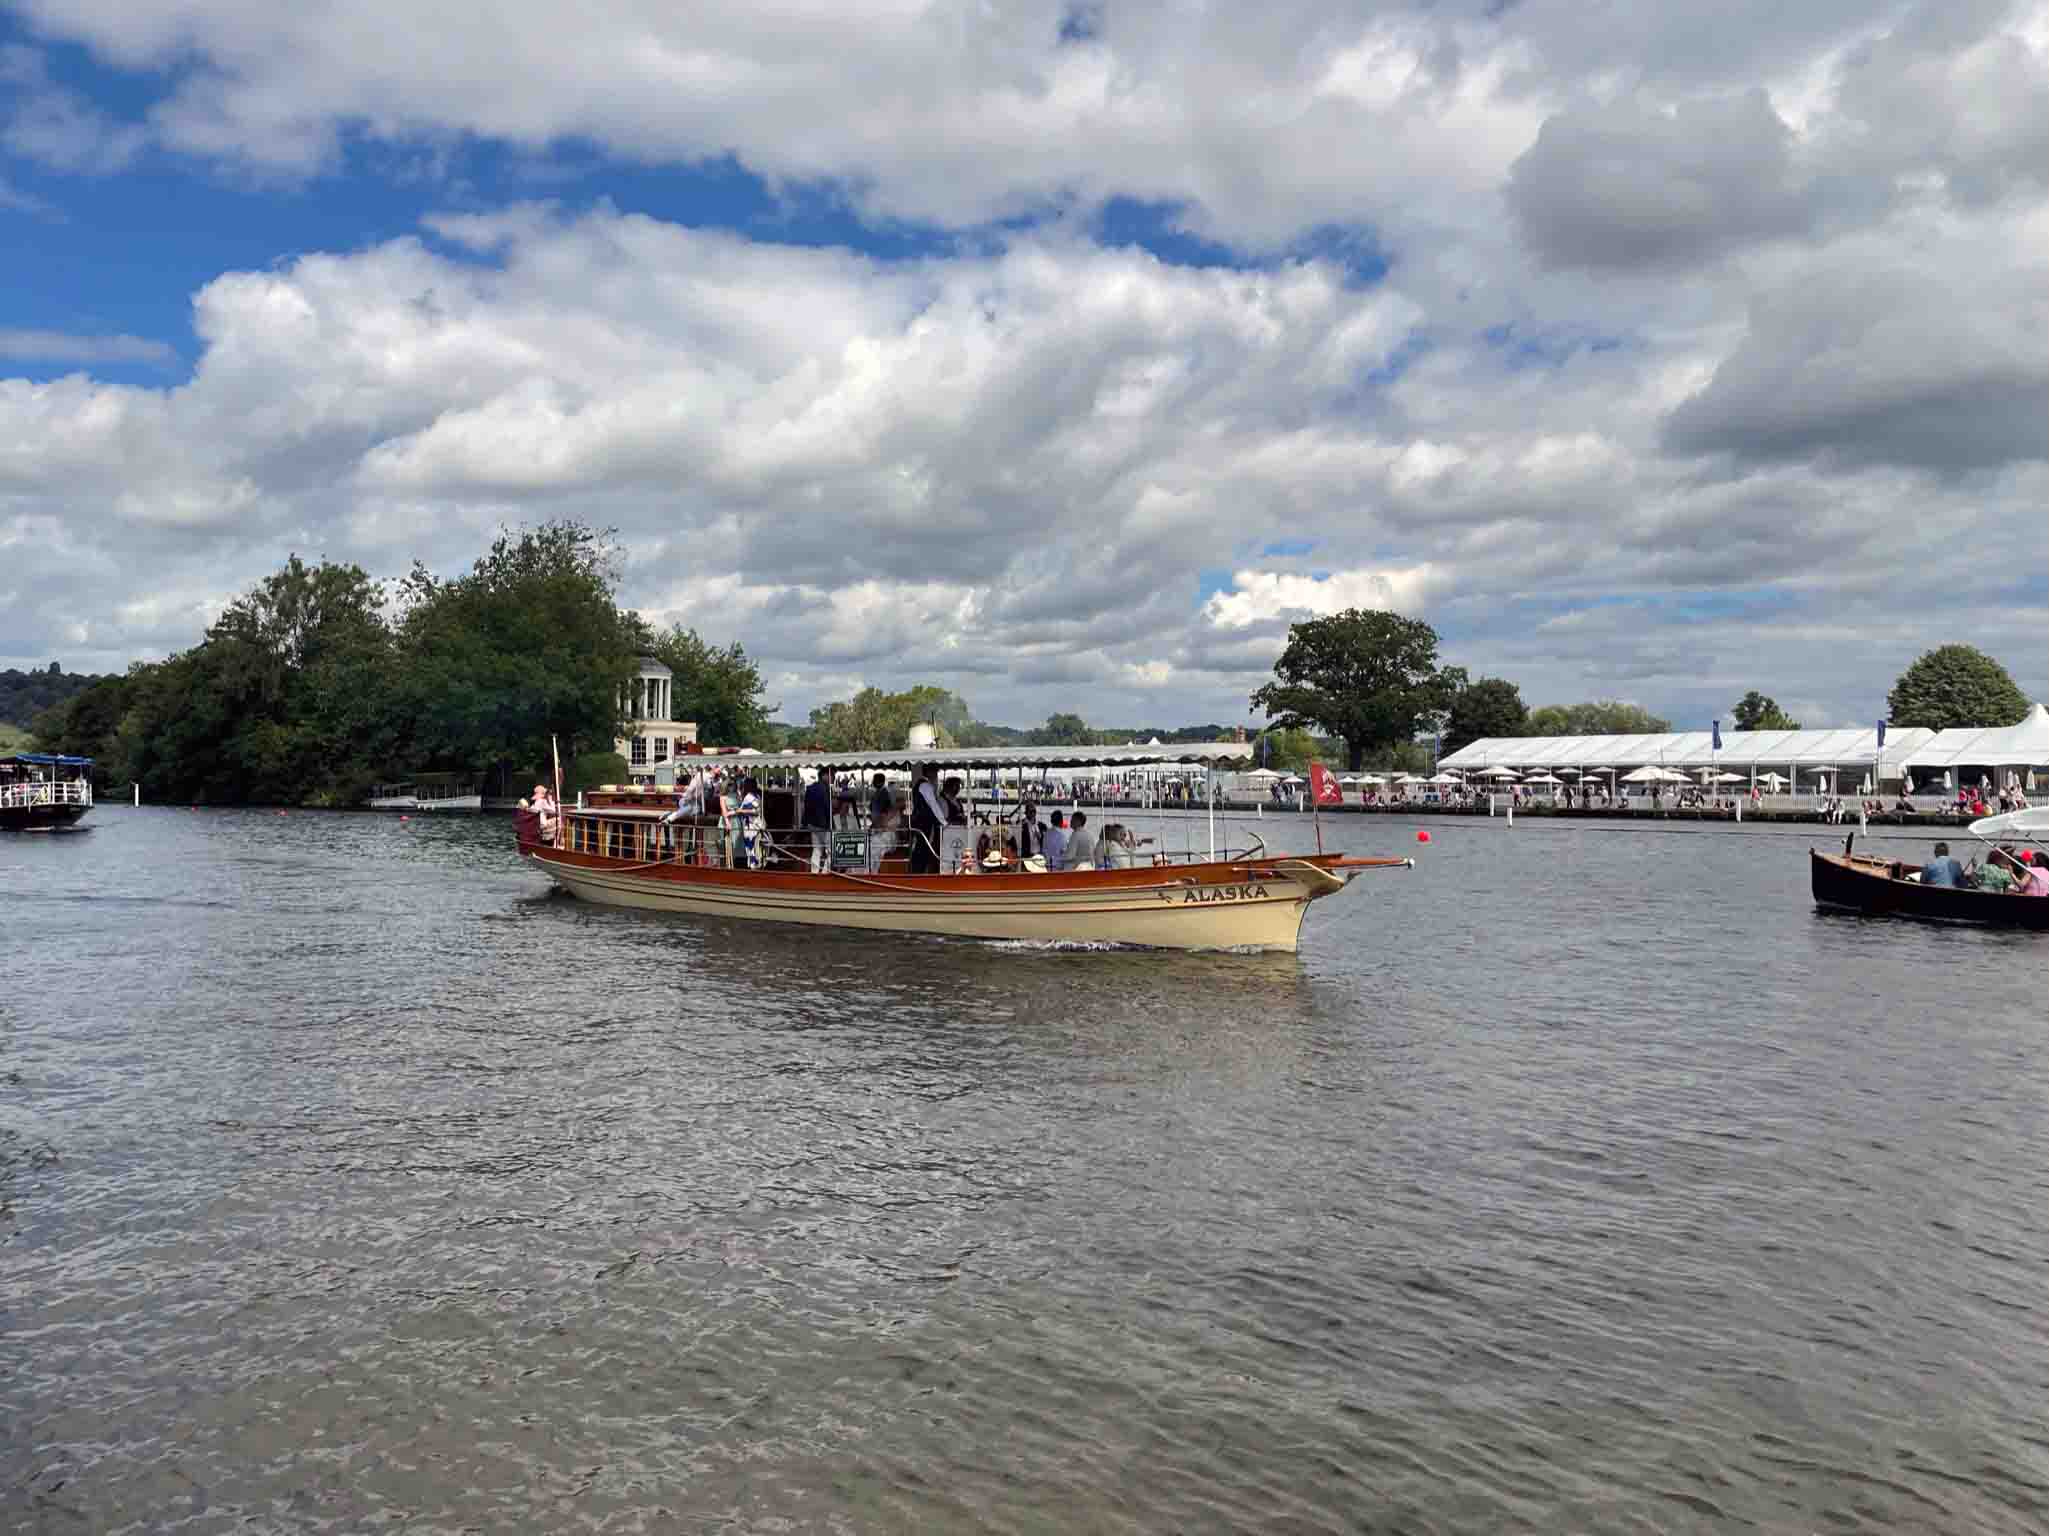 Steamboat Alaska cruising on the River Thames during the Henley Royal Regatta, with spectators and other boats in the background under a partly cloudy sky.